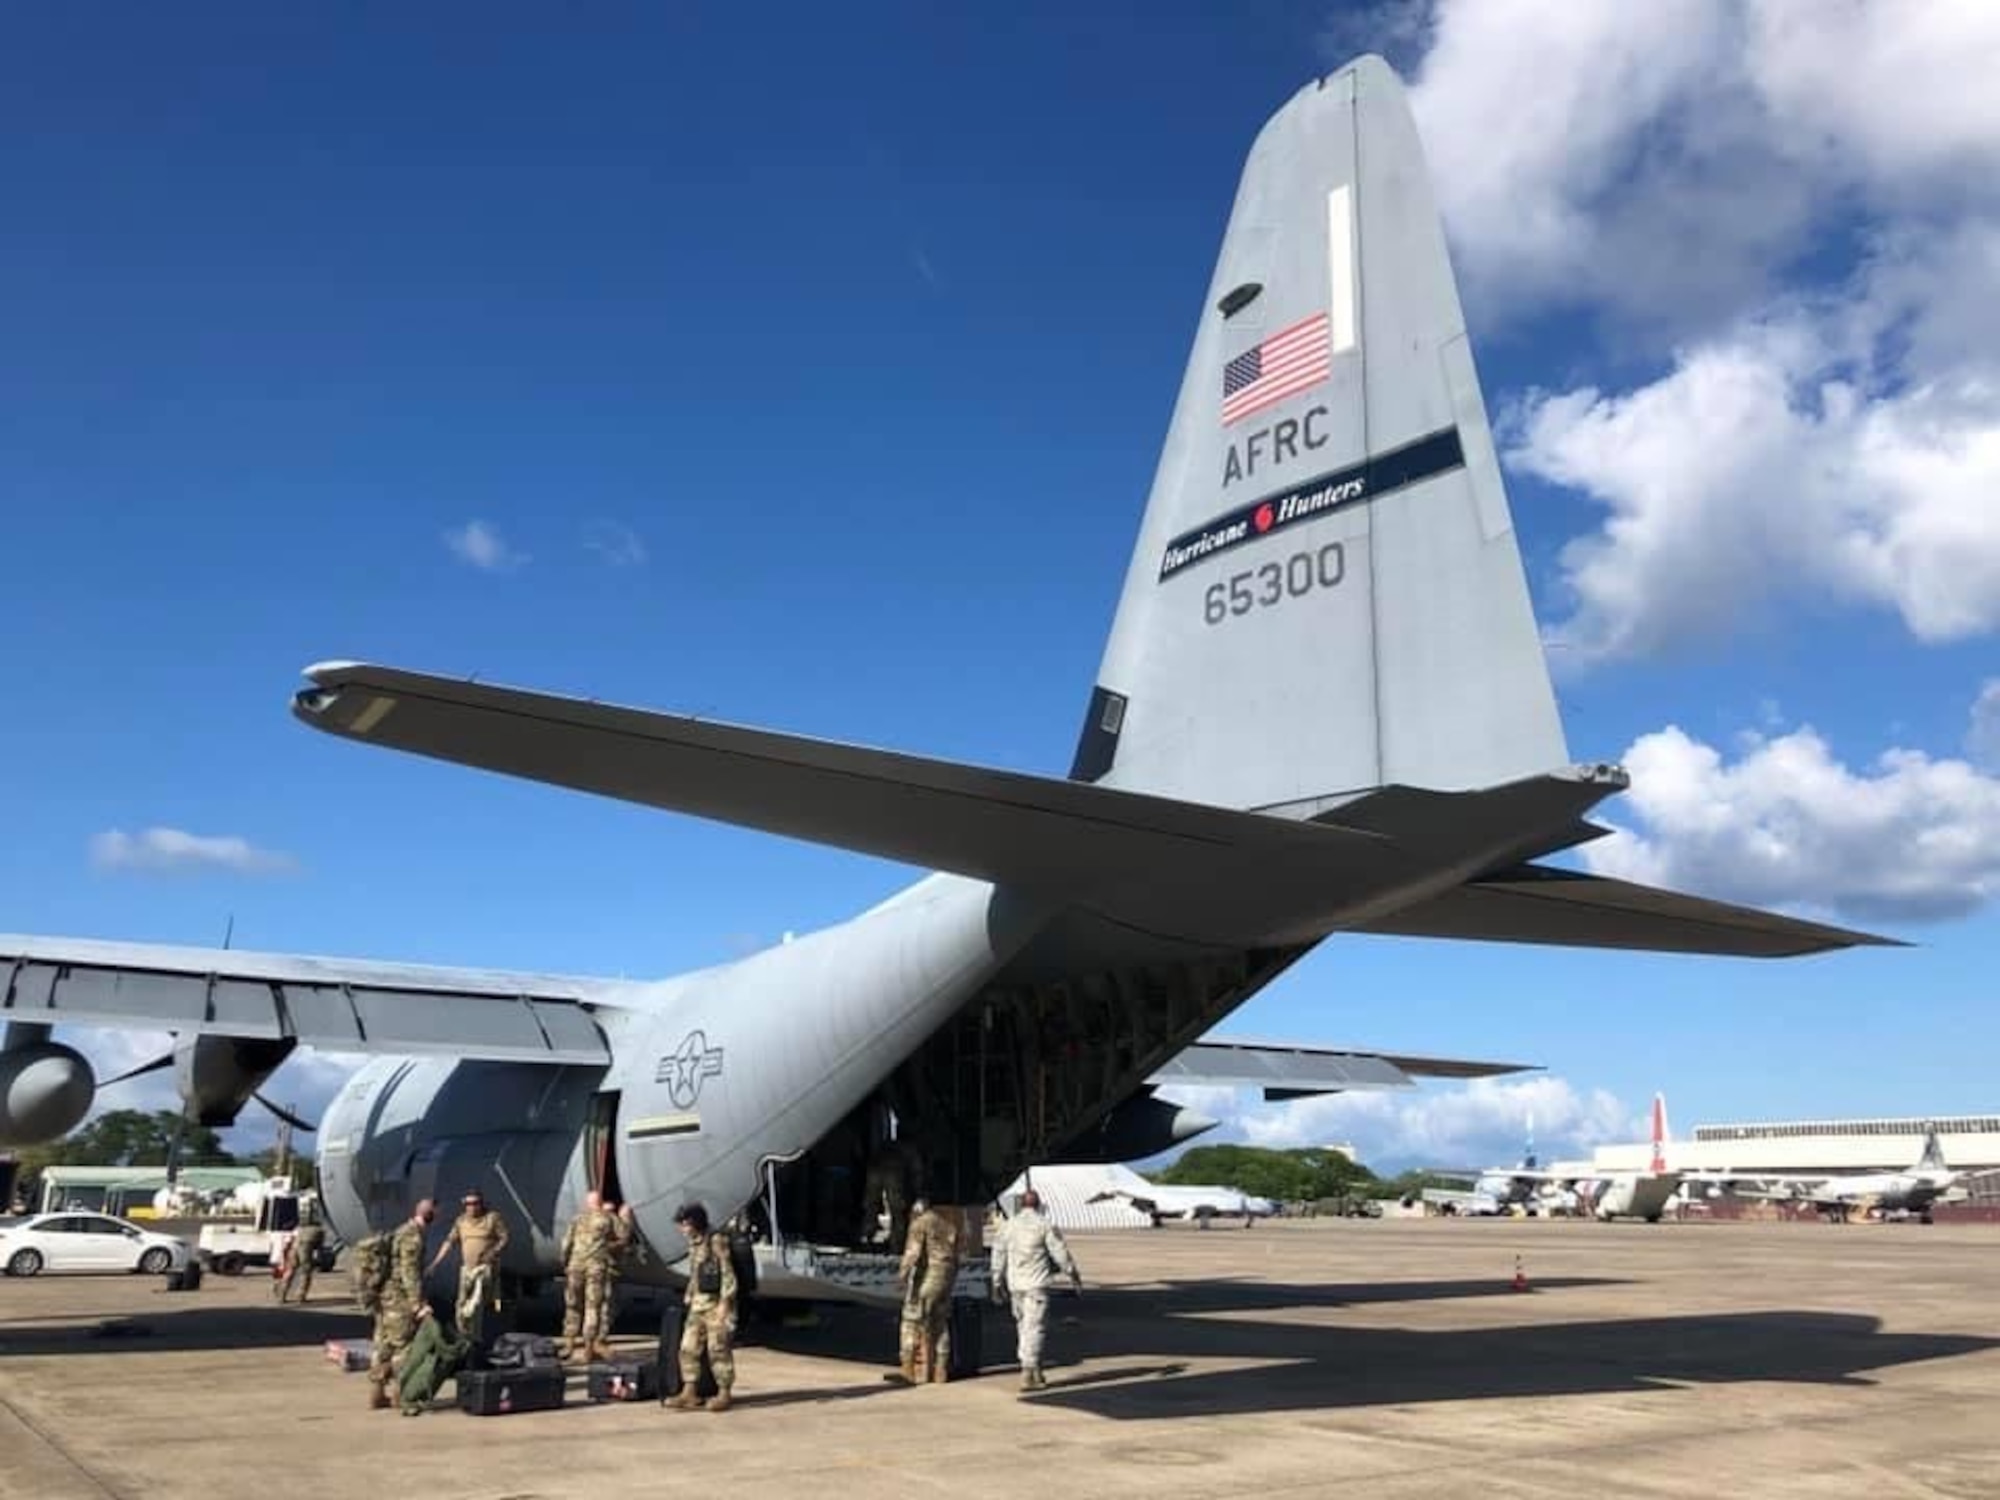 Reserve Citizen Airmen with the 53rd Weather Reconnaissance Squadron “Hurricane Hunters,” offload from a WC-130J Super Hercules aircraft July 23, 2020 at Barbers Point Kapolei Airport, Hawaii. The Air Force Reserve unit assigned to the 403rd Wing at Keesler Air Force Base, Mississippi, are scheduled to fly data-gathering missions into Hurricane Douglas starting July 25. (U.S. AIr Force photo by Lt. Col. Marnee A.C. Losurdo)